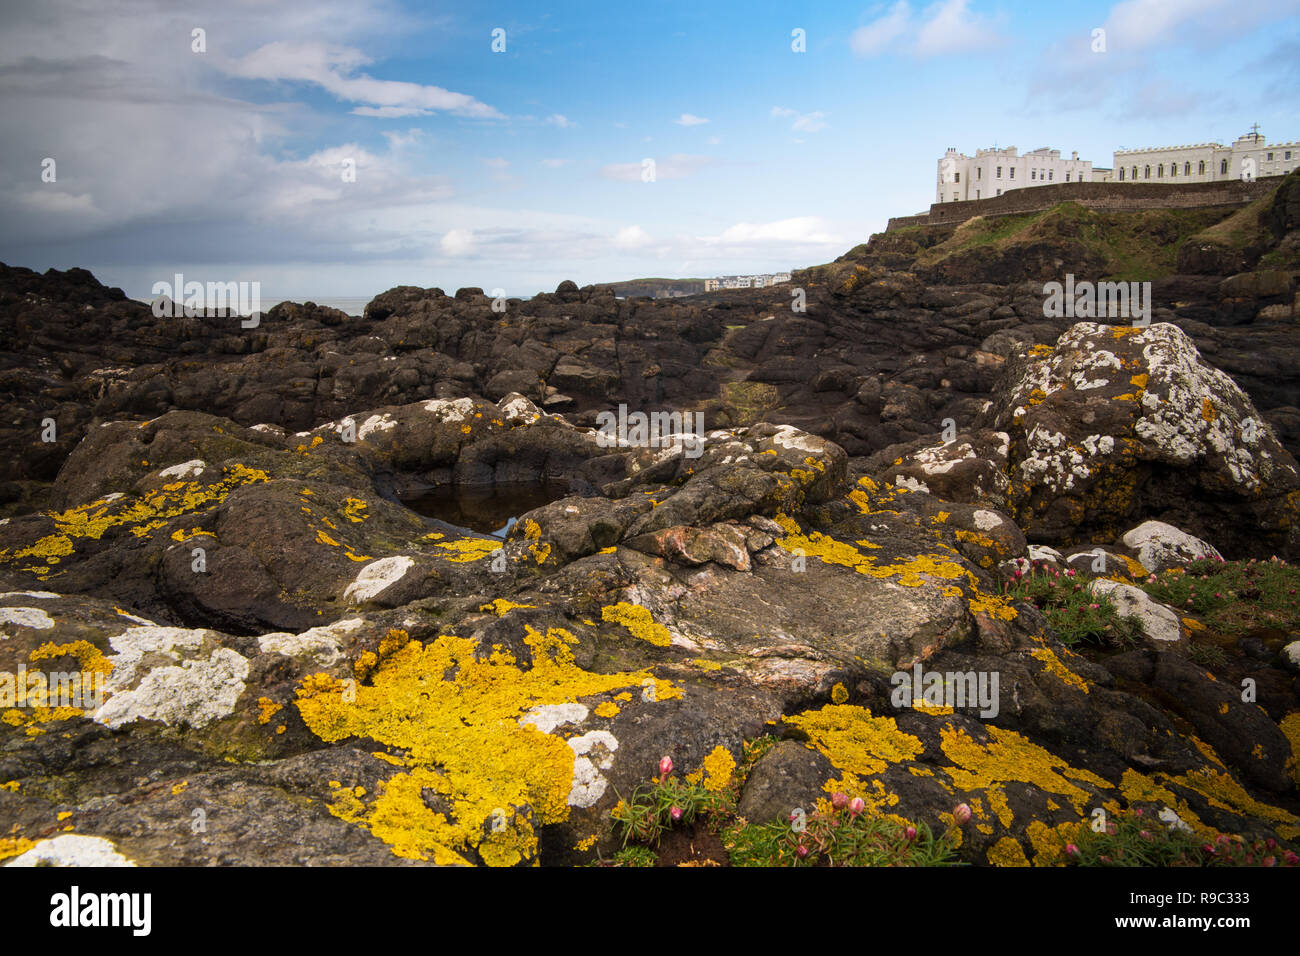 Cliff walk at Port Stewart, Northern Ireland with the Dominican College visible on the clifftop and lichen and seagrass covered rocks in the foreground. Stock Photo